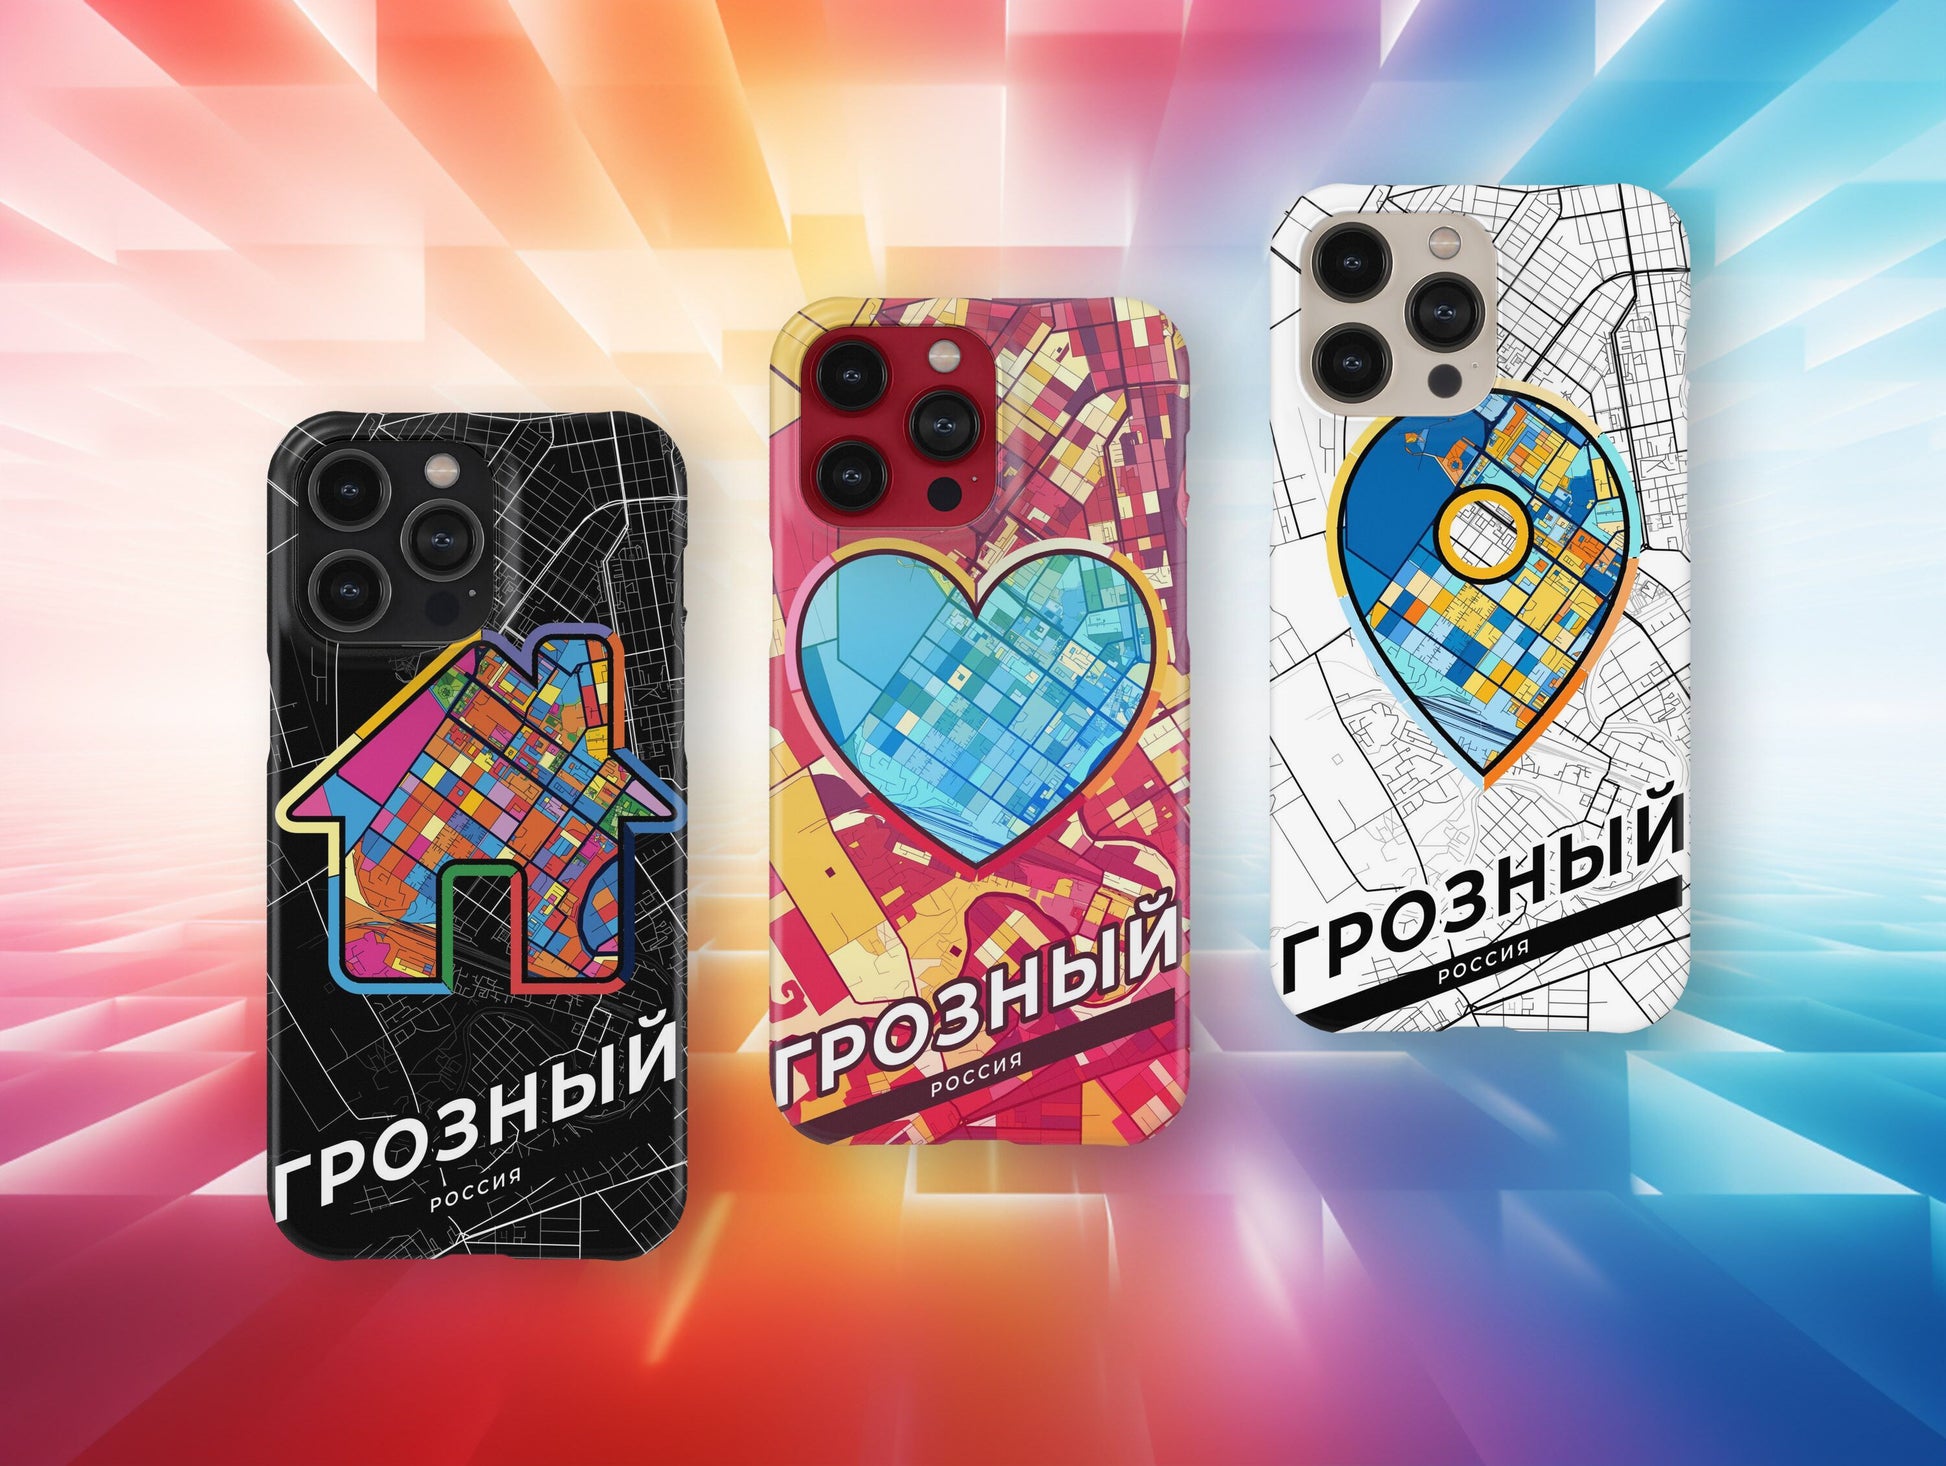 Grozny Russia slim phone case with colorful icon. Birthday, wedding or housewarming gift. Couple match cases.